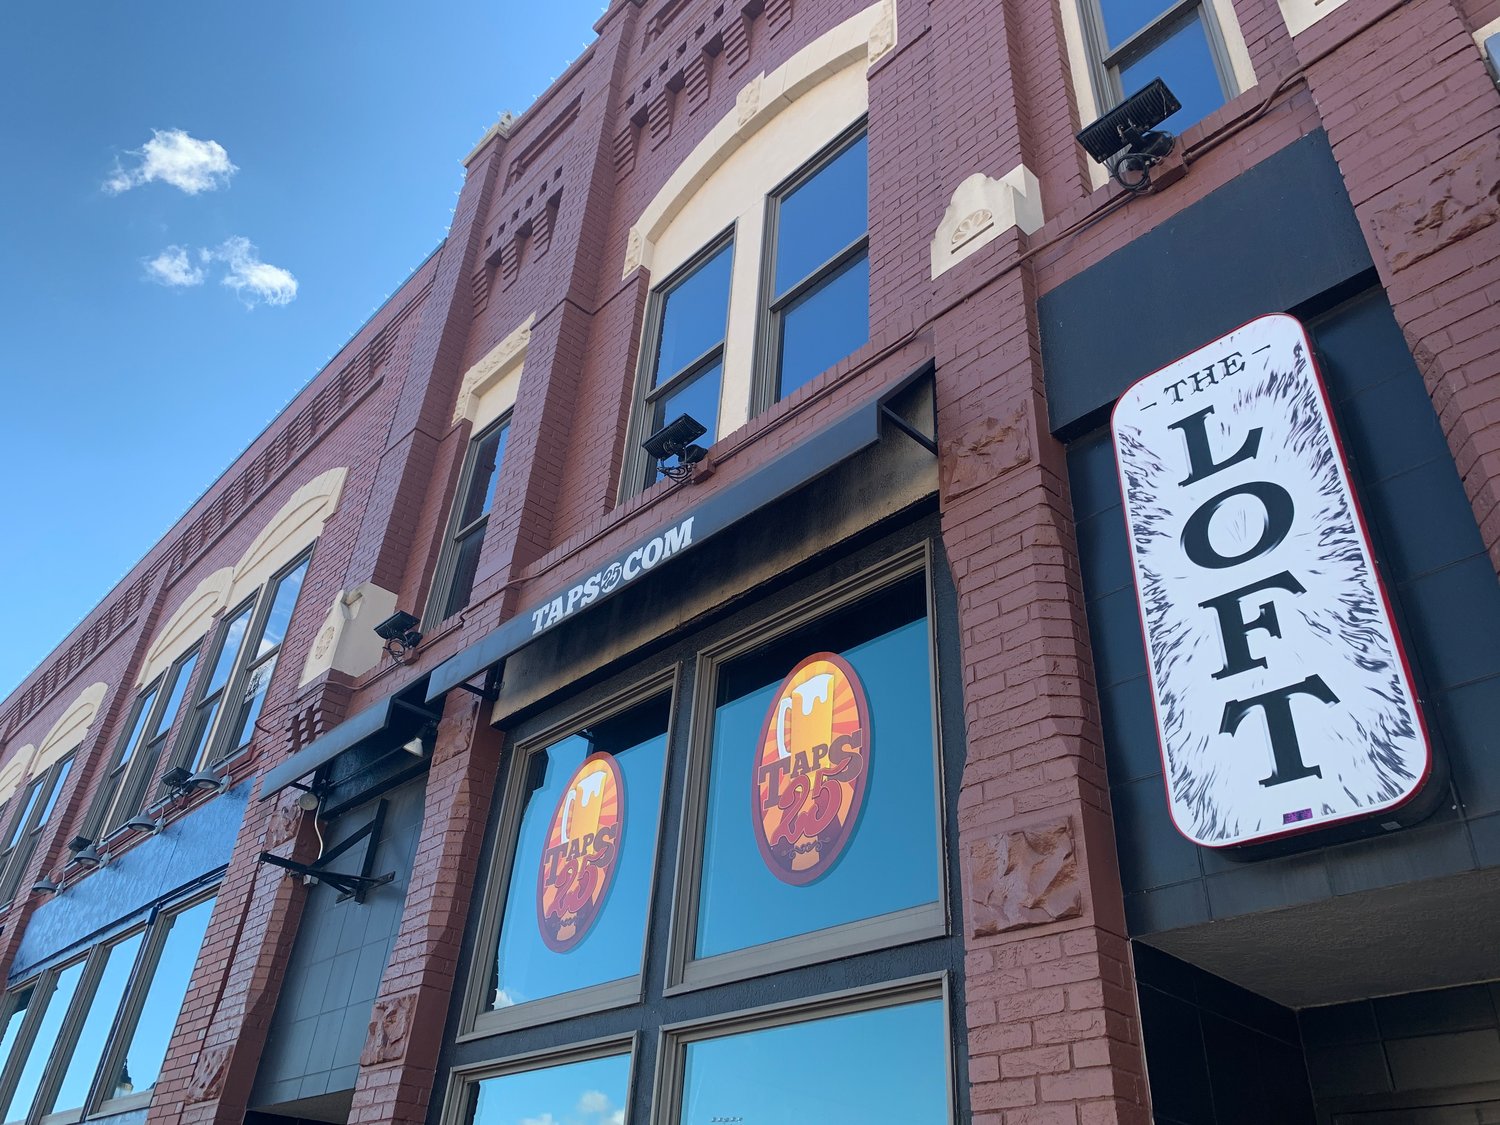 The Loft's Facebook page posted and deleted a post on Aug. 3 that it was closing due to financial hardship.